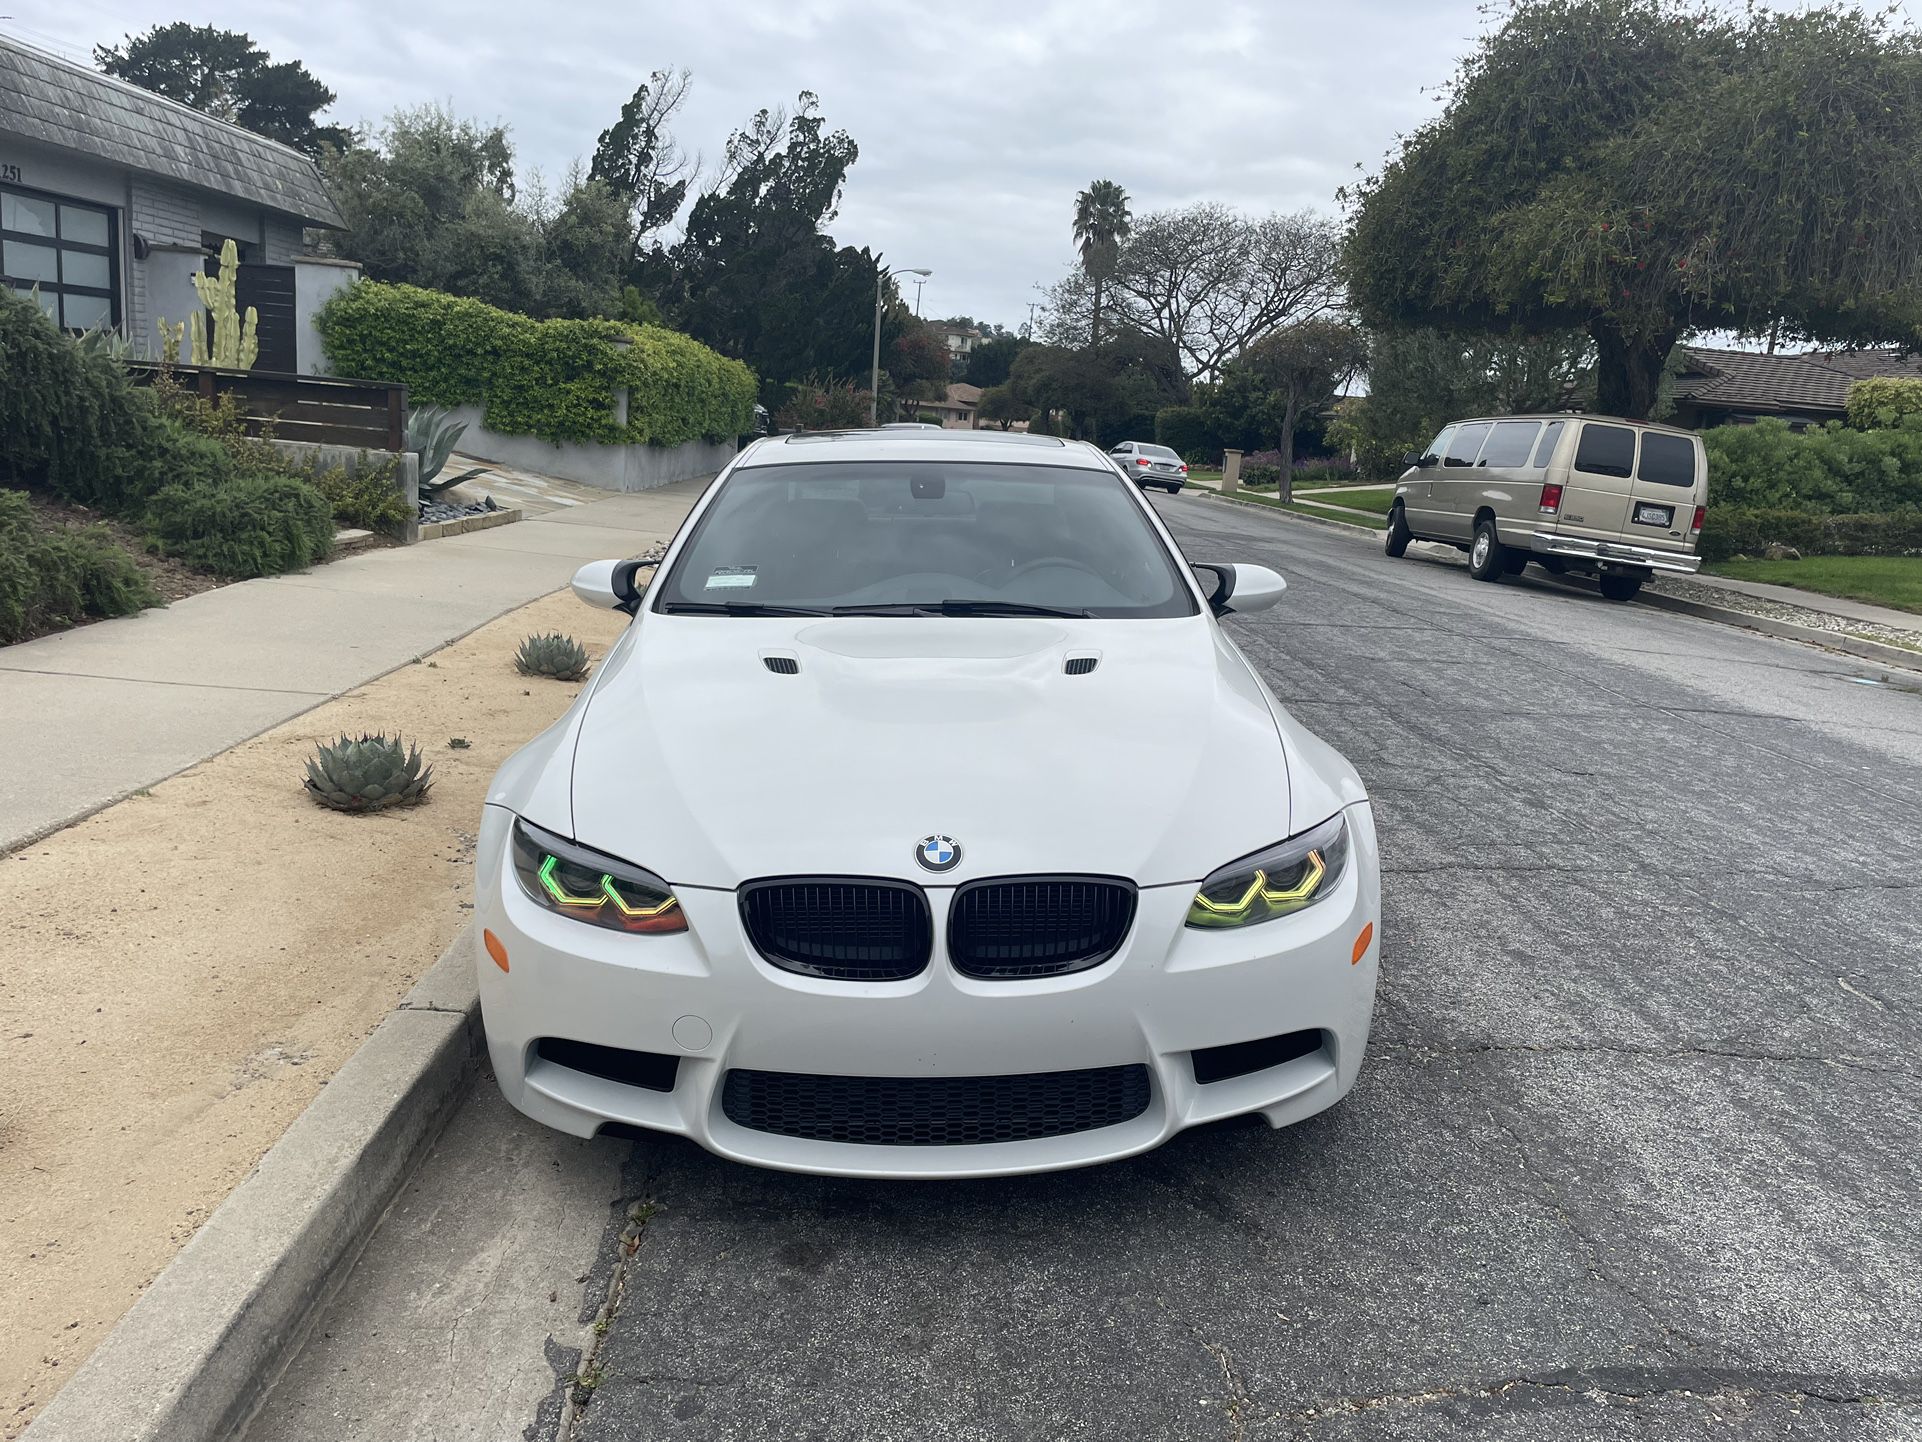 Bayoptiks BMW M3 Headlights For Trade This Weekend ONLY